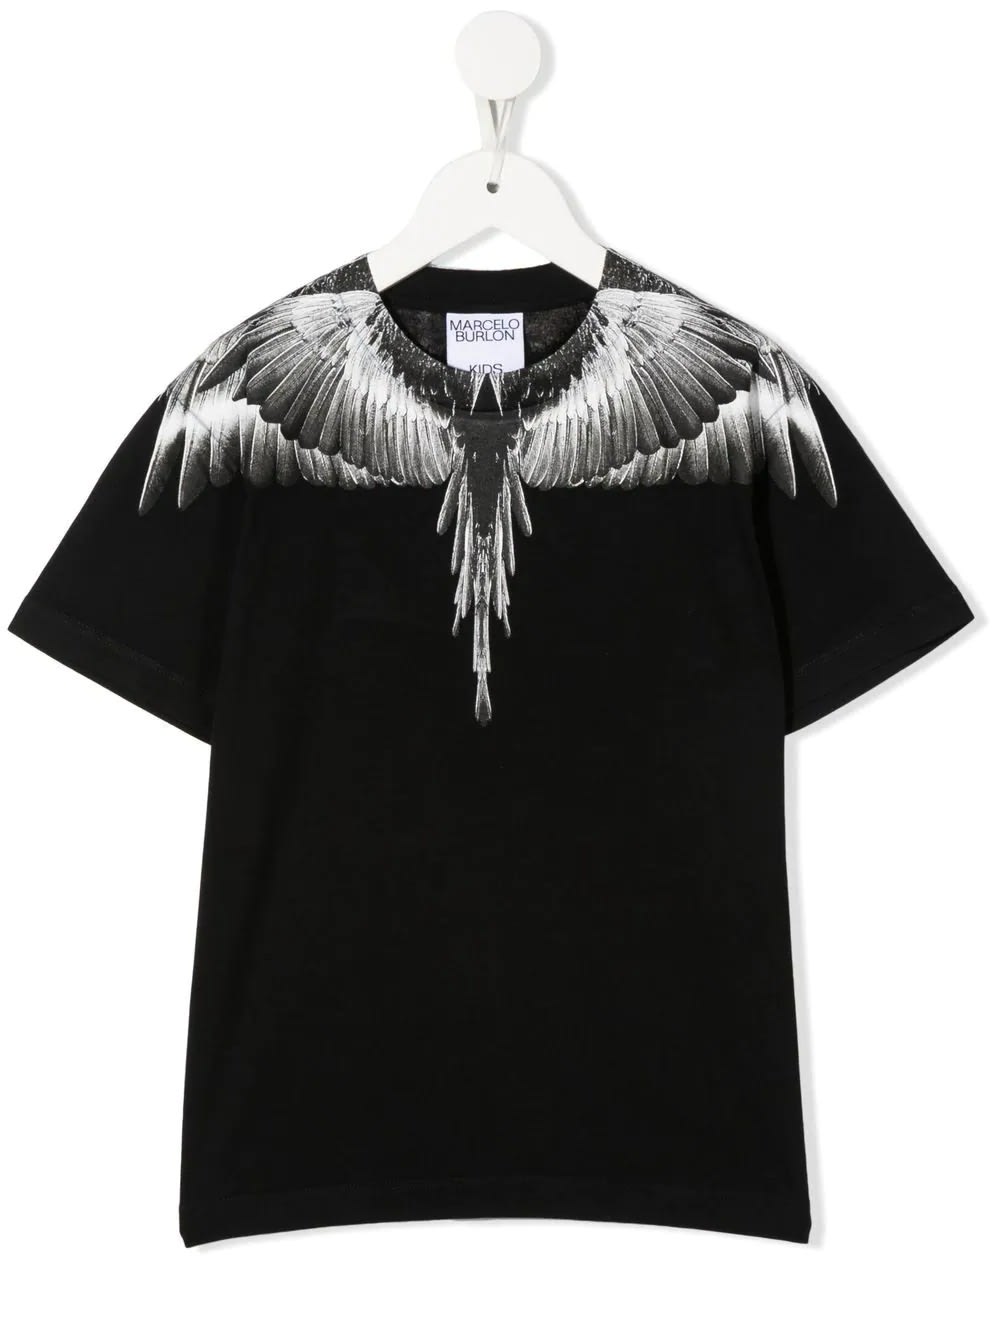 Marcelo Burlon Kids Black T-shirt With White And Grey Wings